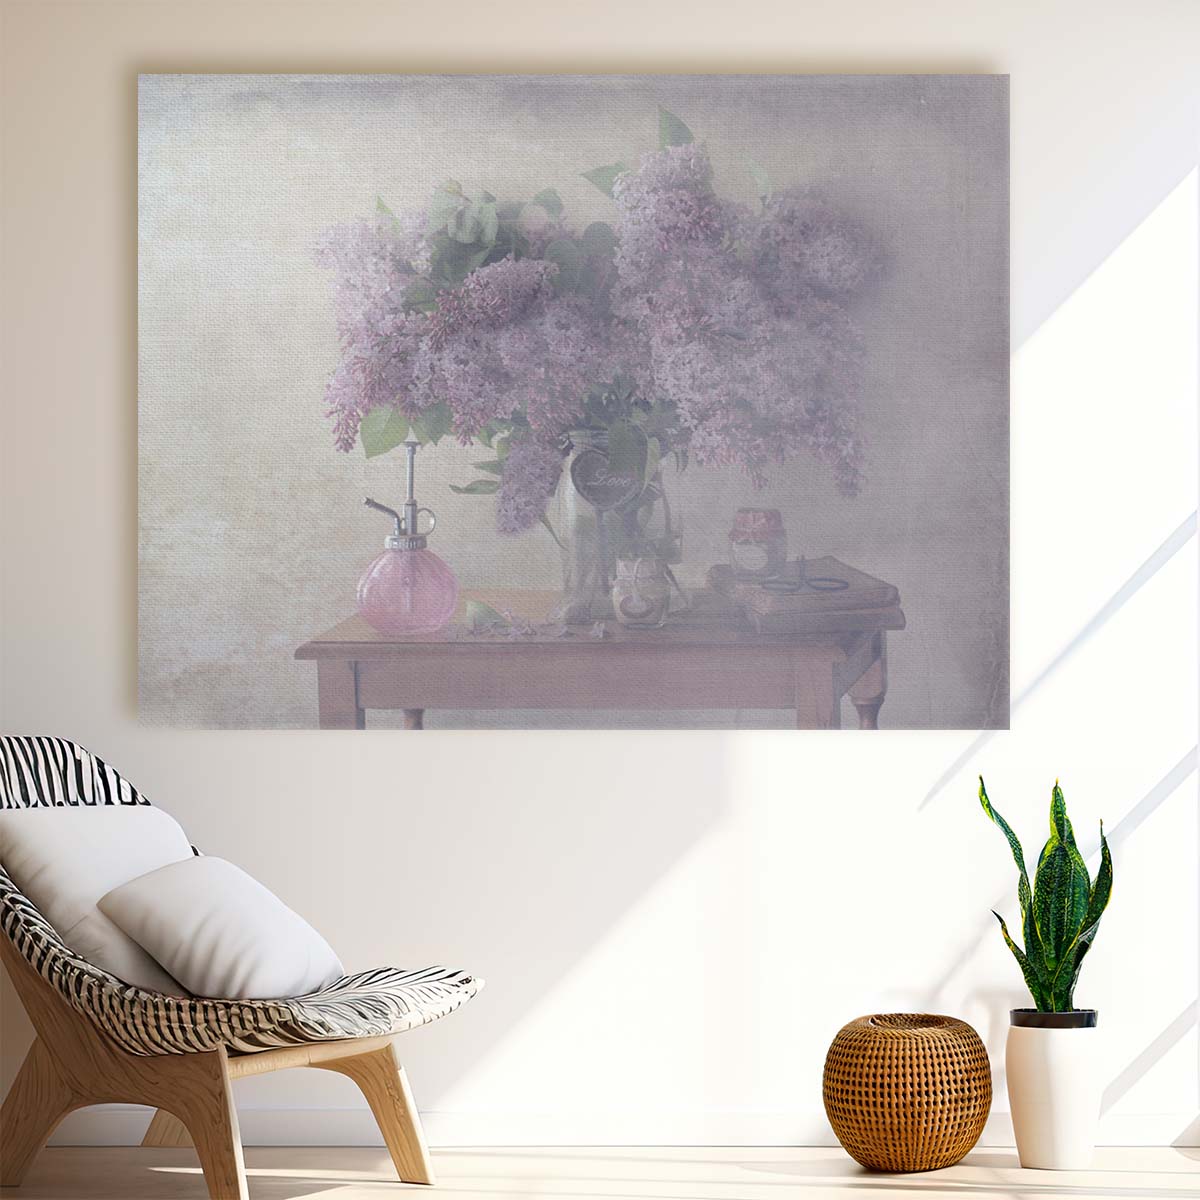 Romantic Vintage Lilac Floral Still Life Wall Art by Luxuriance Designs. Made in USA.